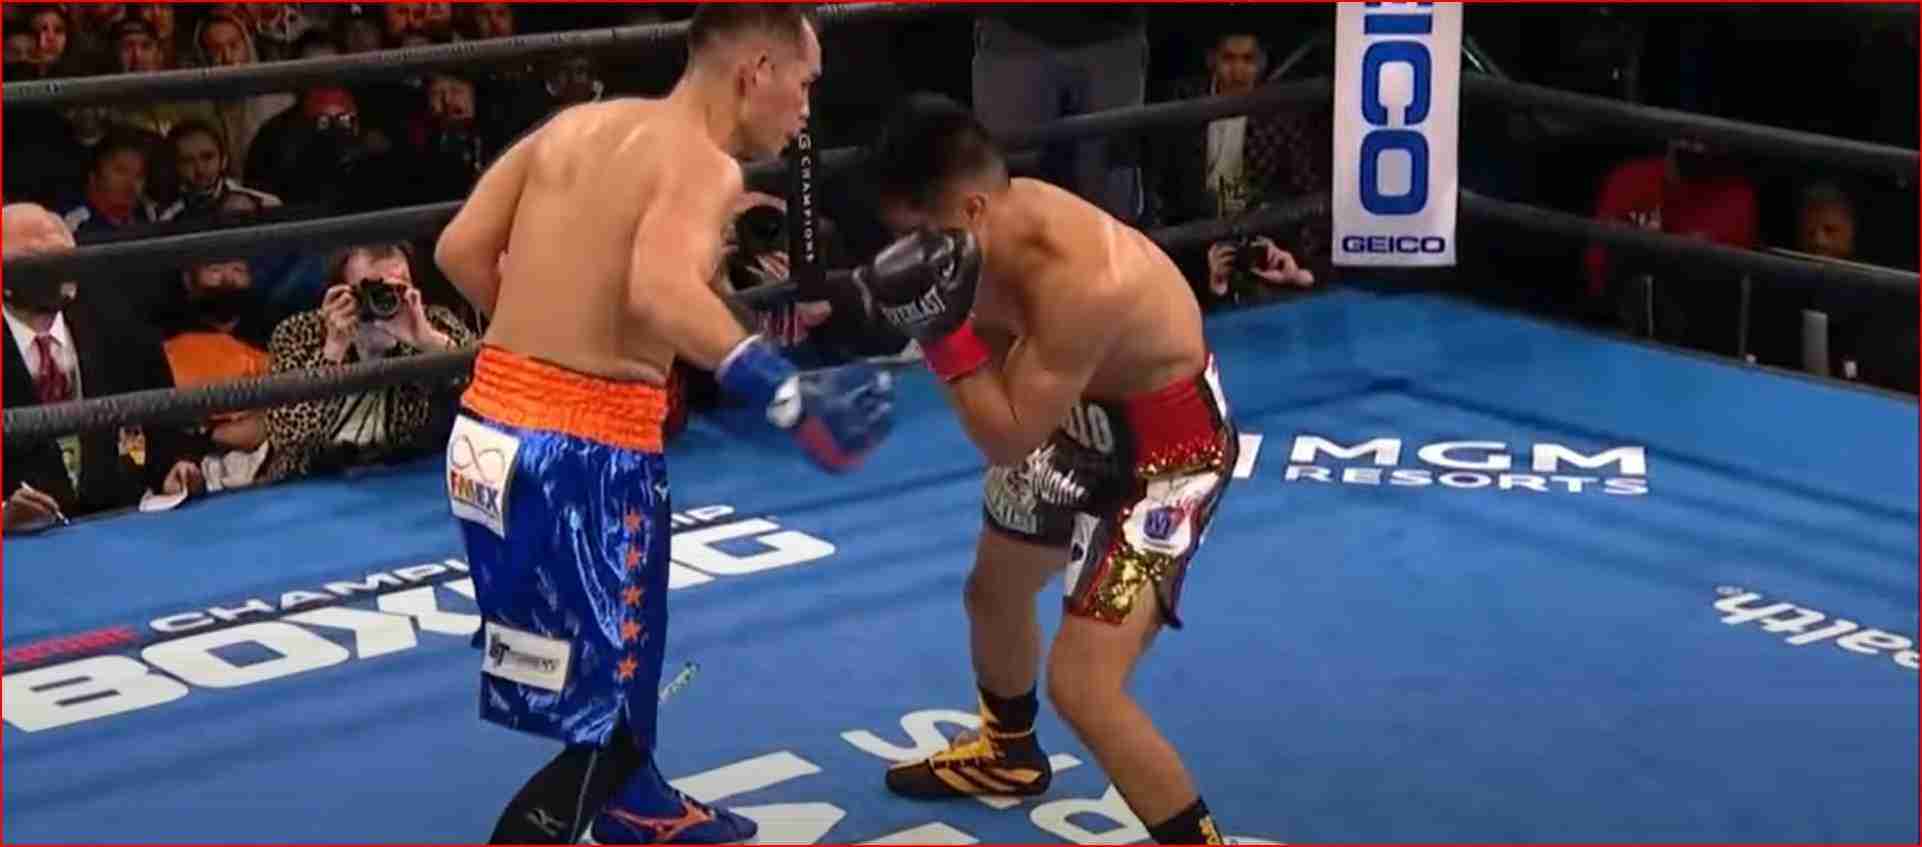 Watch: Nonito Donaire Brutally Knocks Out Gaballo With Body Shot